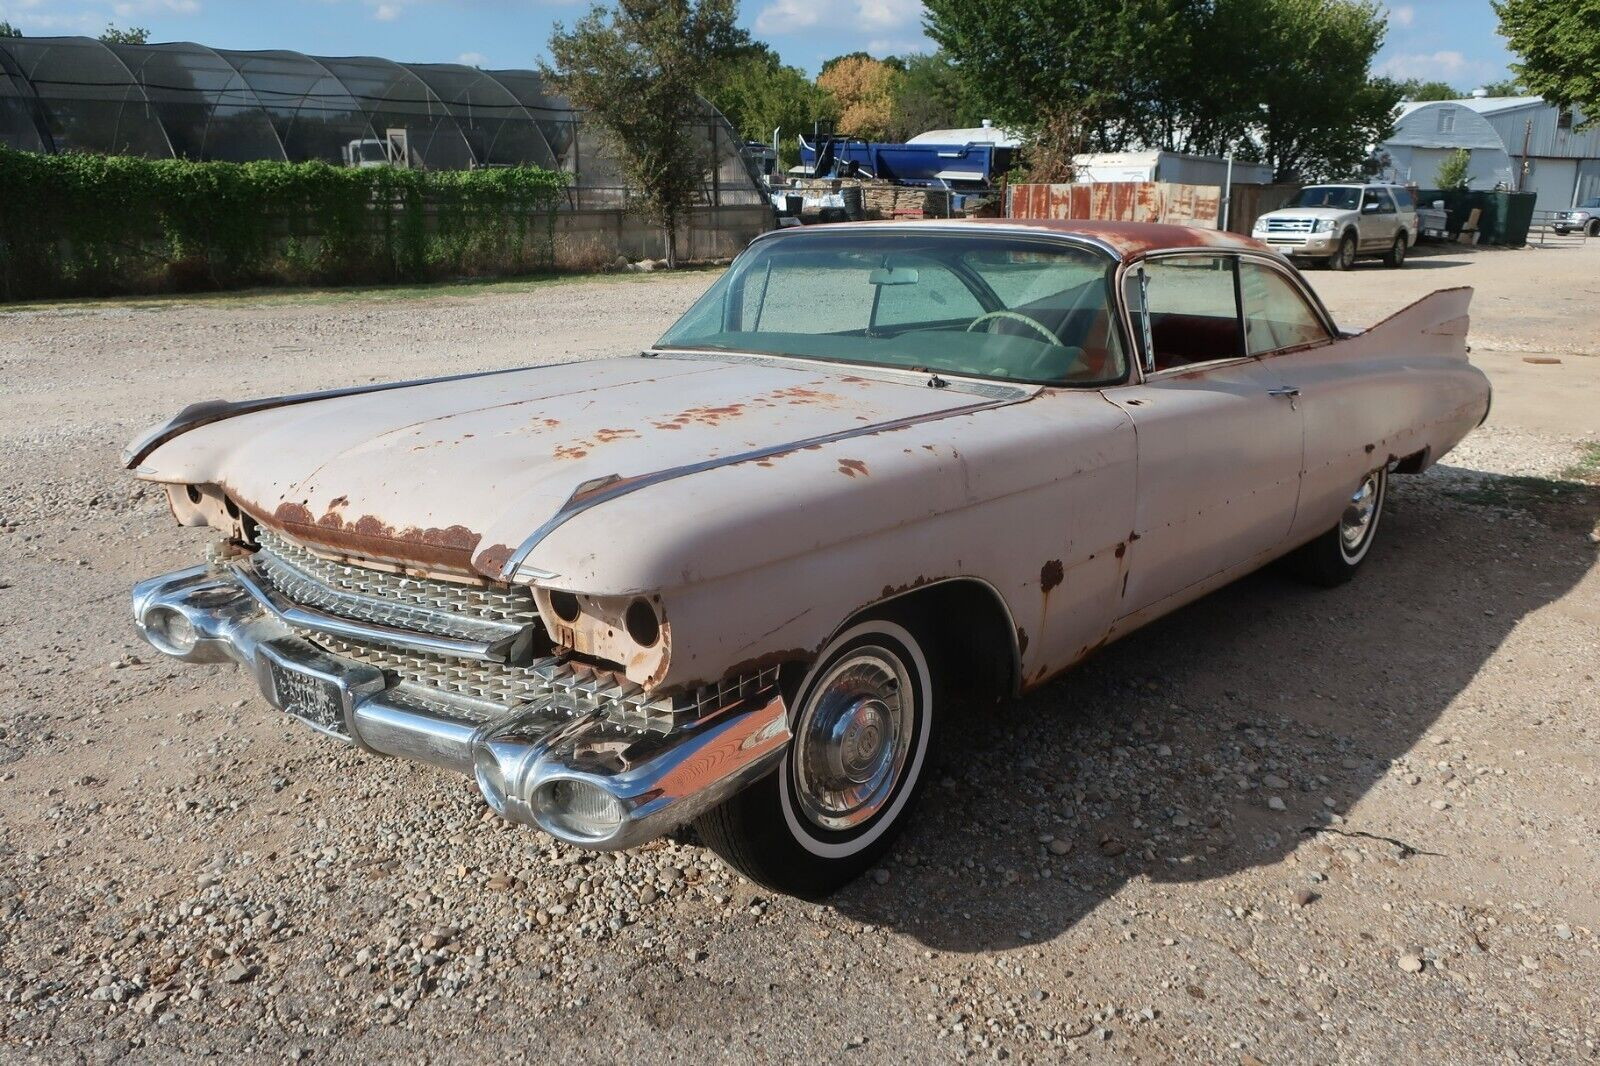 Once Pink and Proud, This 1959 Cadillac Sedan DeVille Is Waiting